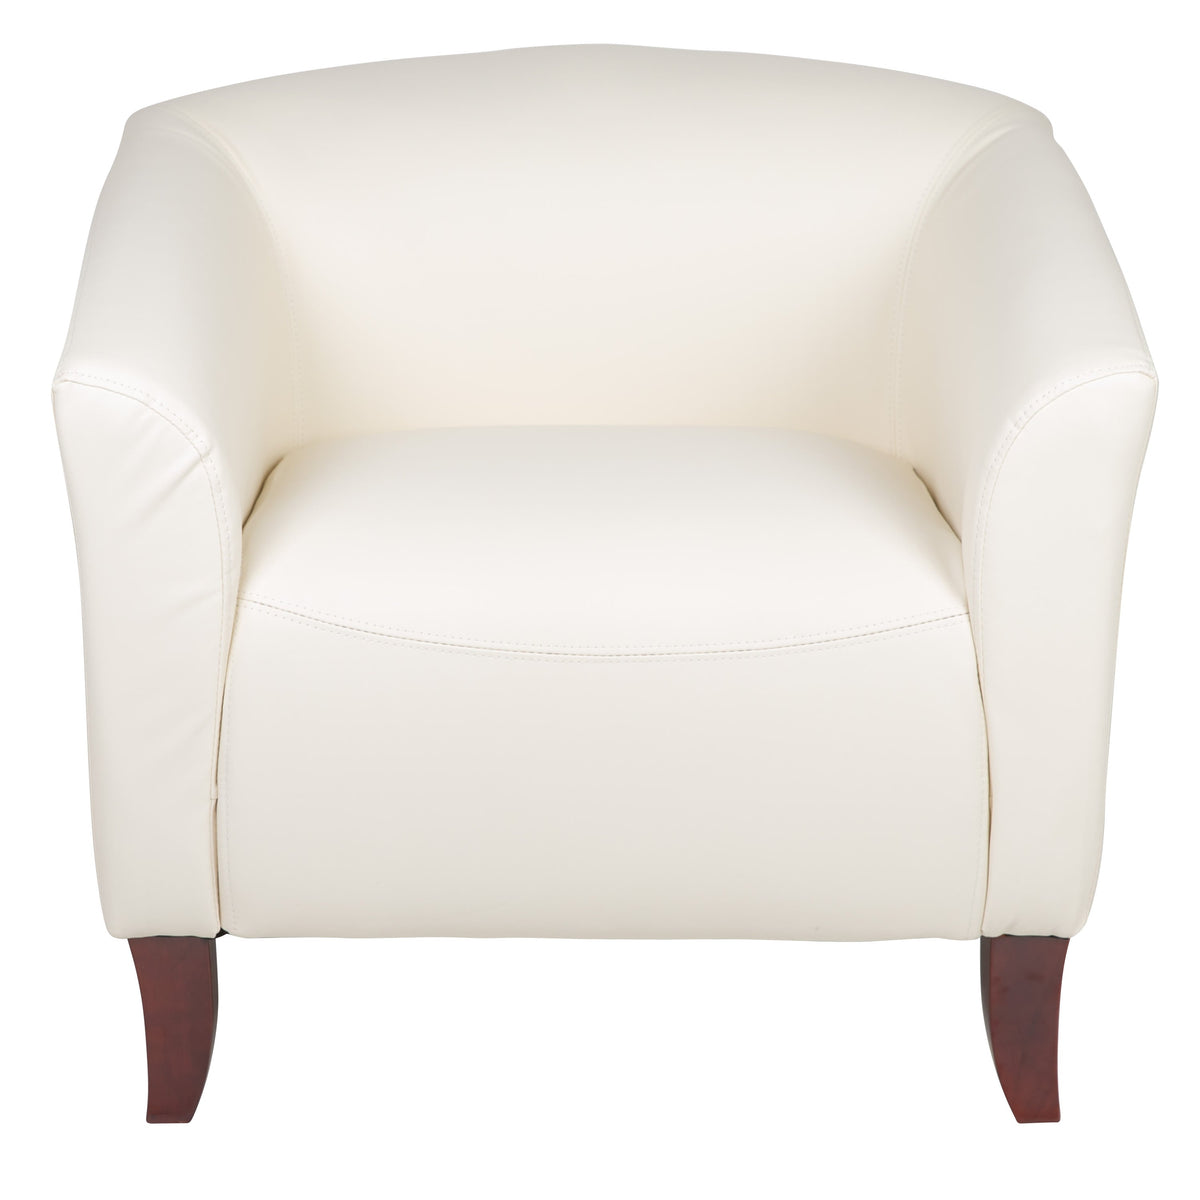 Ivory |#| Ivory LeatherSoft Chair with Cherry Wood Feet - Lobby or Guest Seating